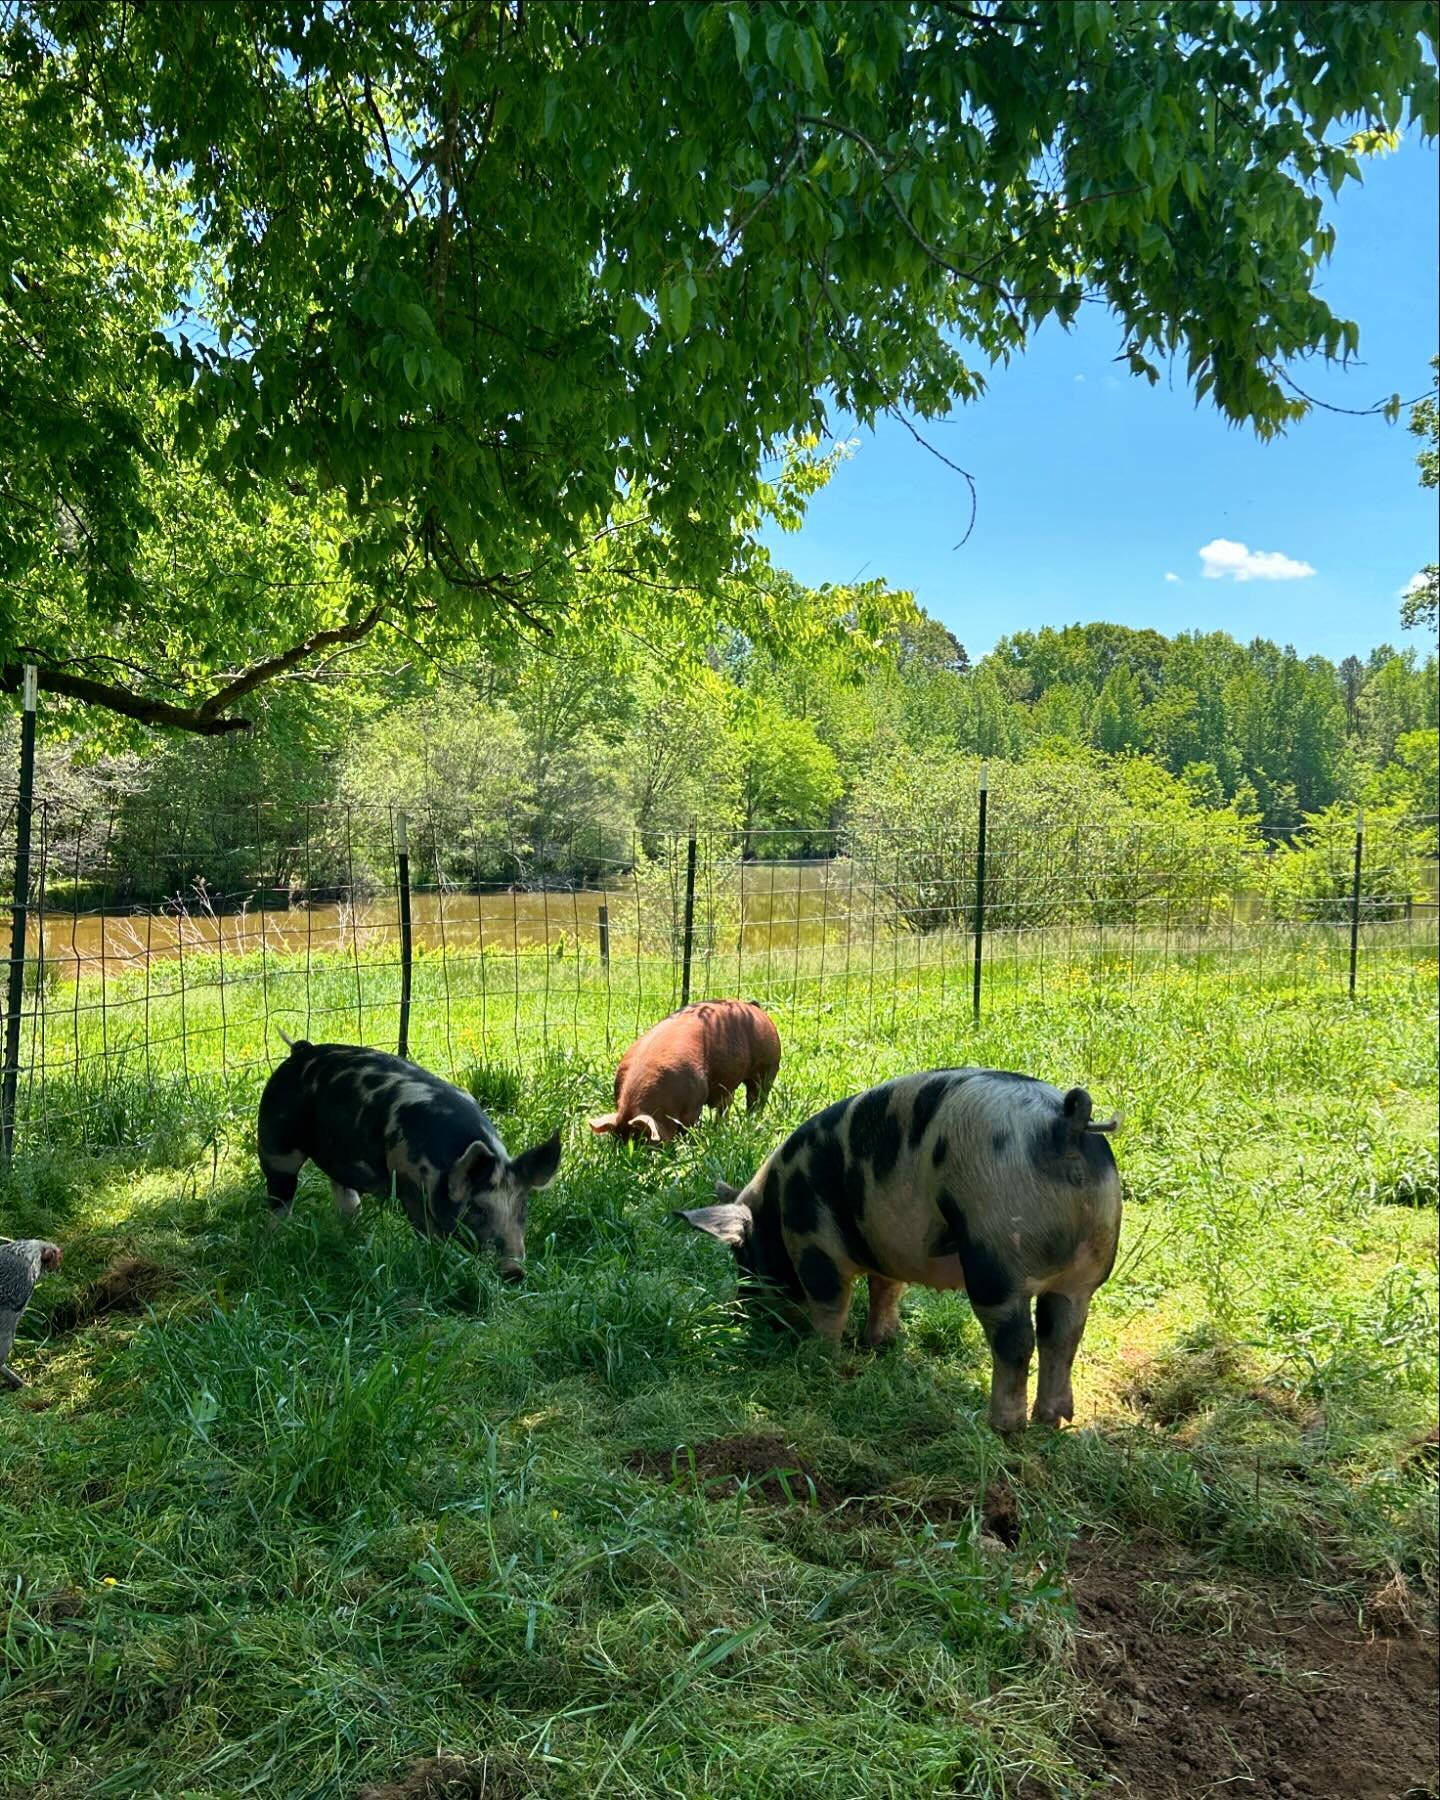 This week on the farm: our pigs enjoying some pasture, a teen homeschool camper working on the latest project in the forge, cicada invasion, and the Saturday Slowdown at @ramblerill ! Come join us for a market day with lots of great local farms, bake